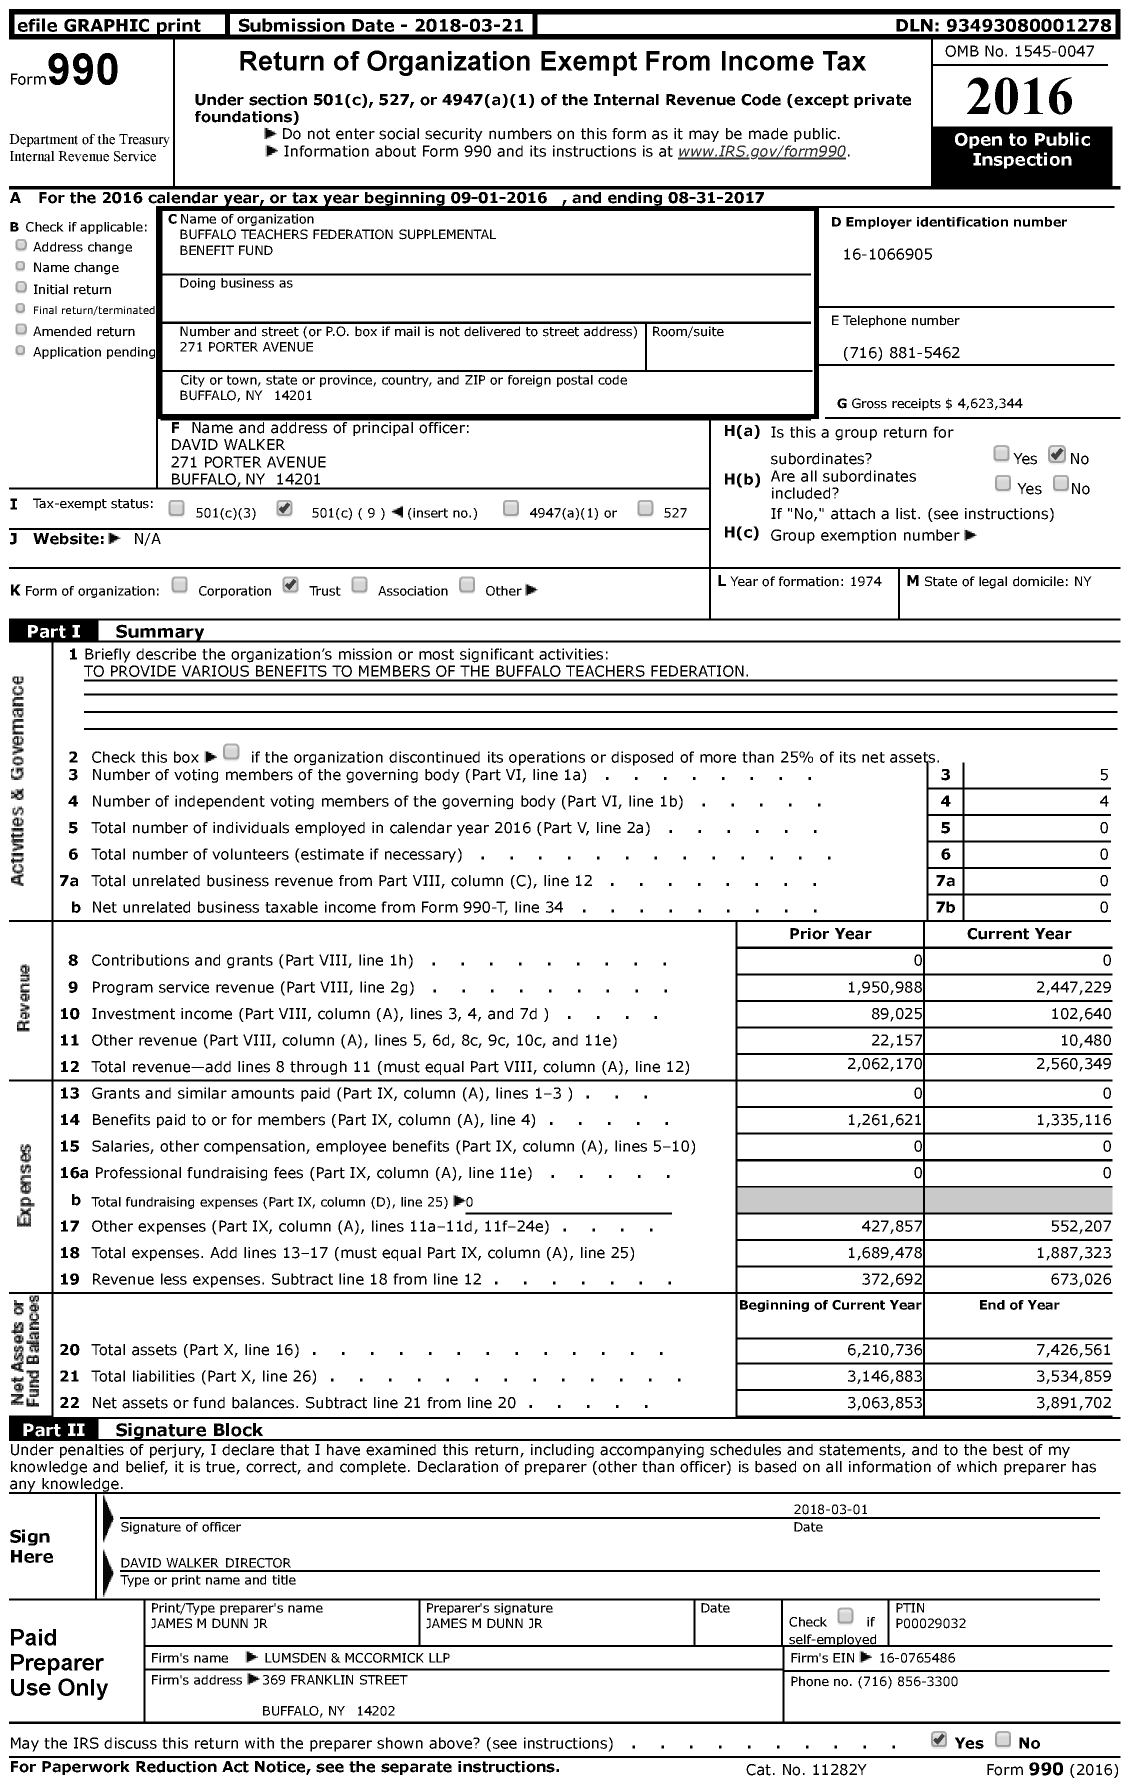 Image of first page of 2016 Form 990 for Buffalo Teachers Federation Supplemental Benefit Fund